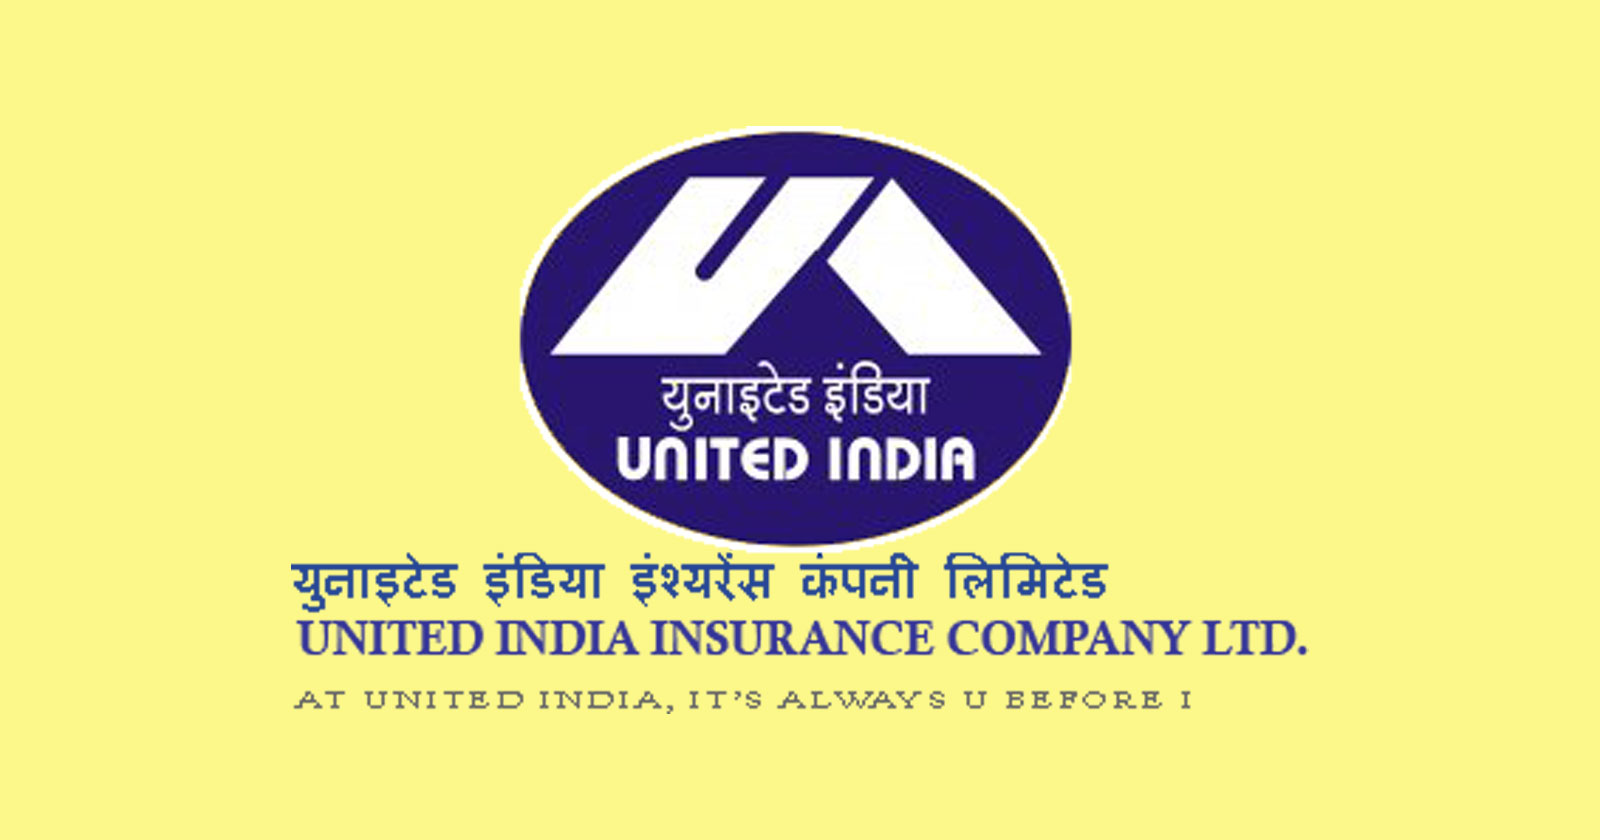 Multiple openings - United India Insurance Company - Legal Specialities -Finance Specialities - Accountants - Jobscan - taxscan